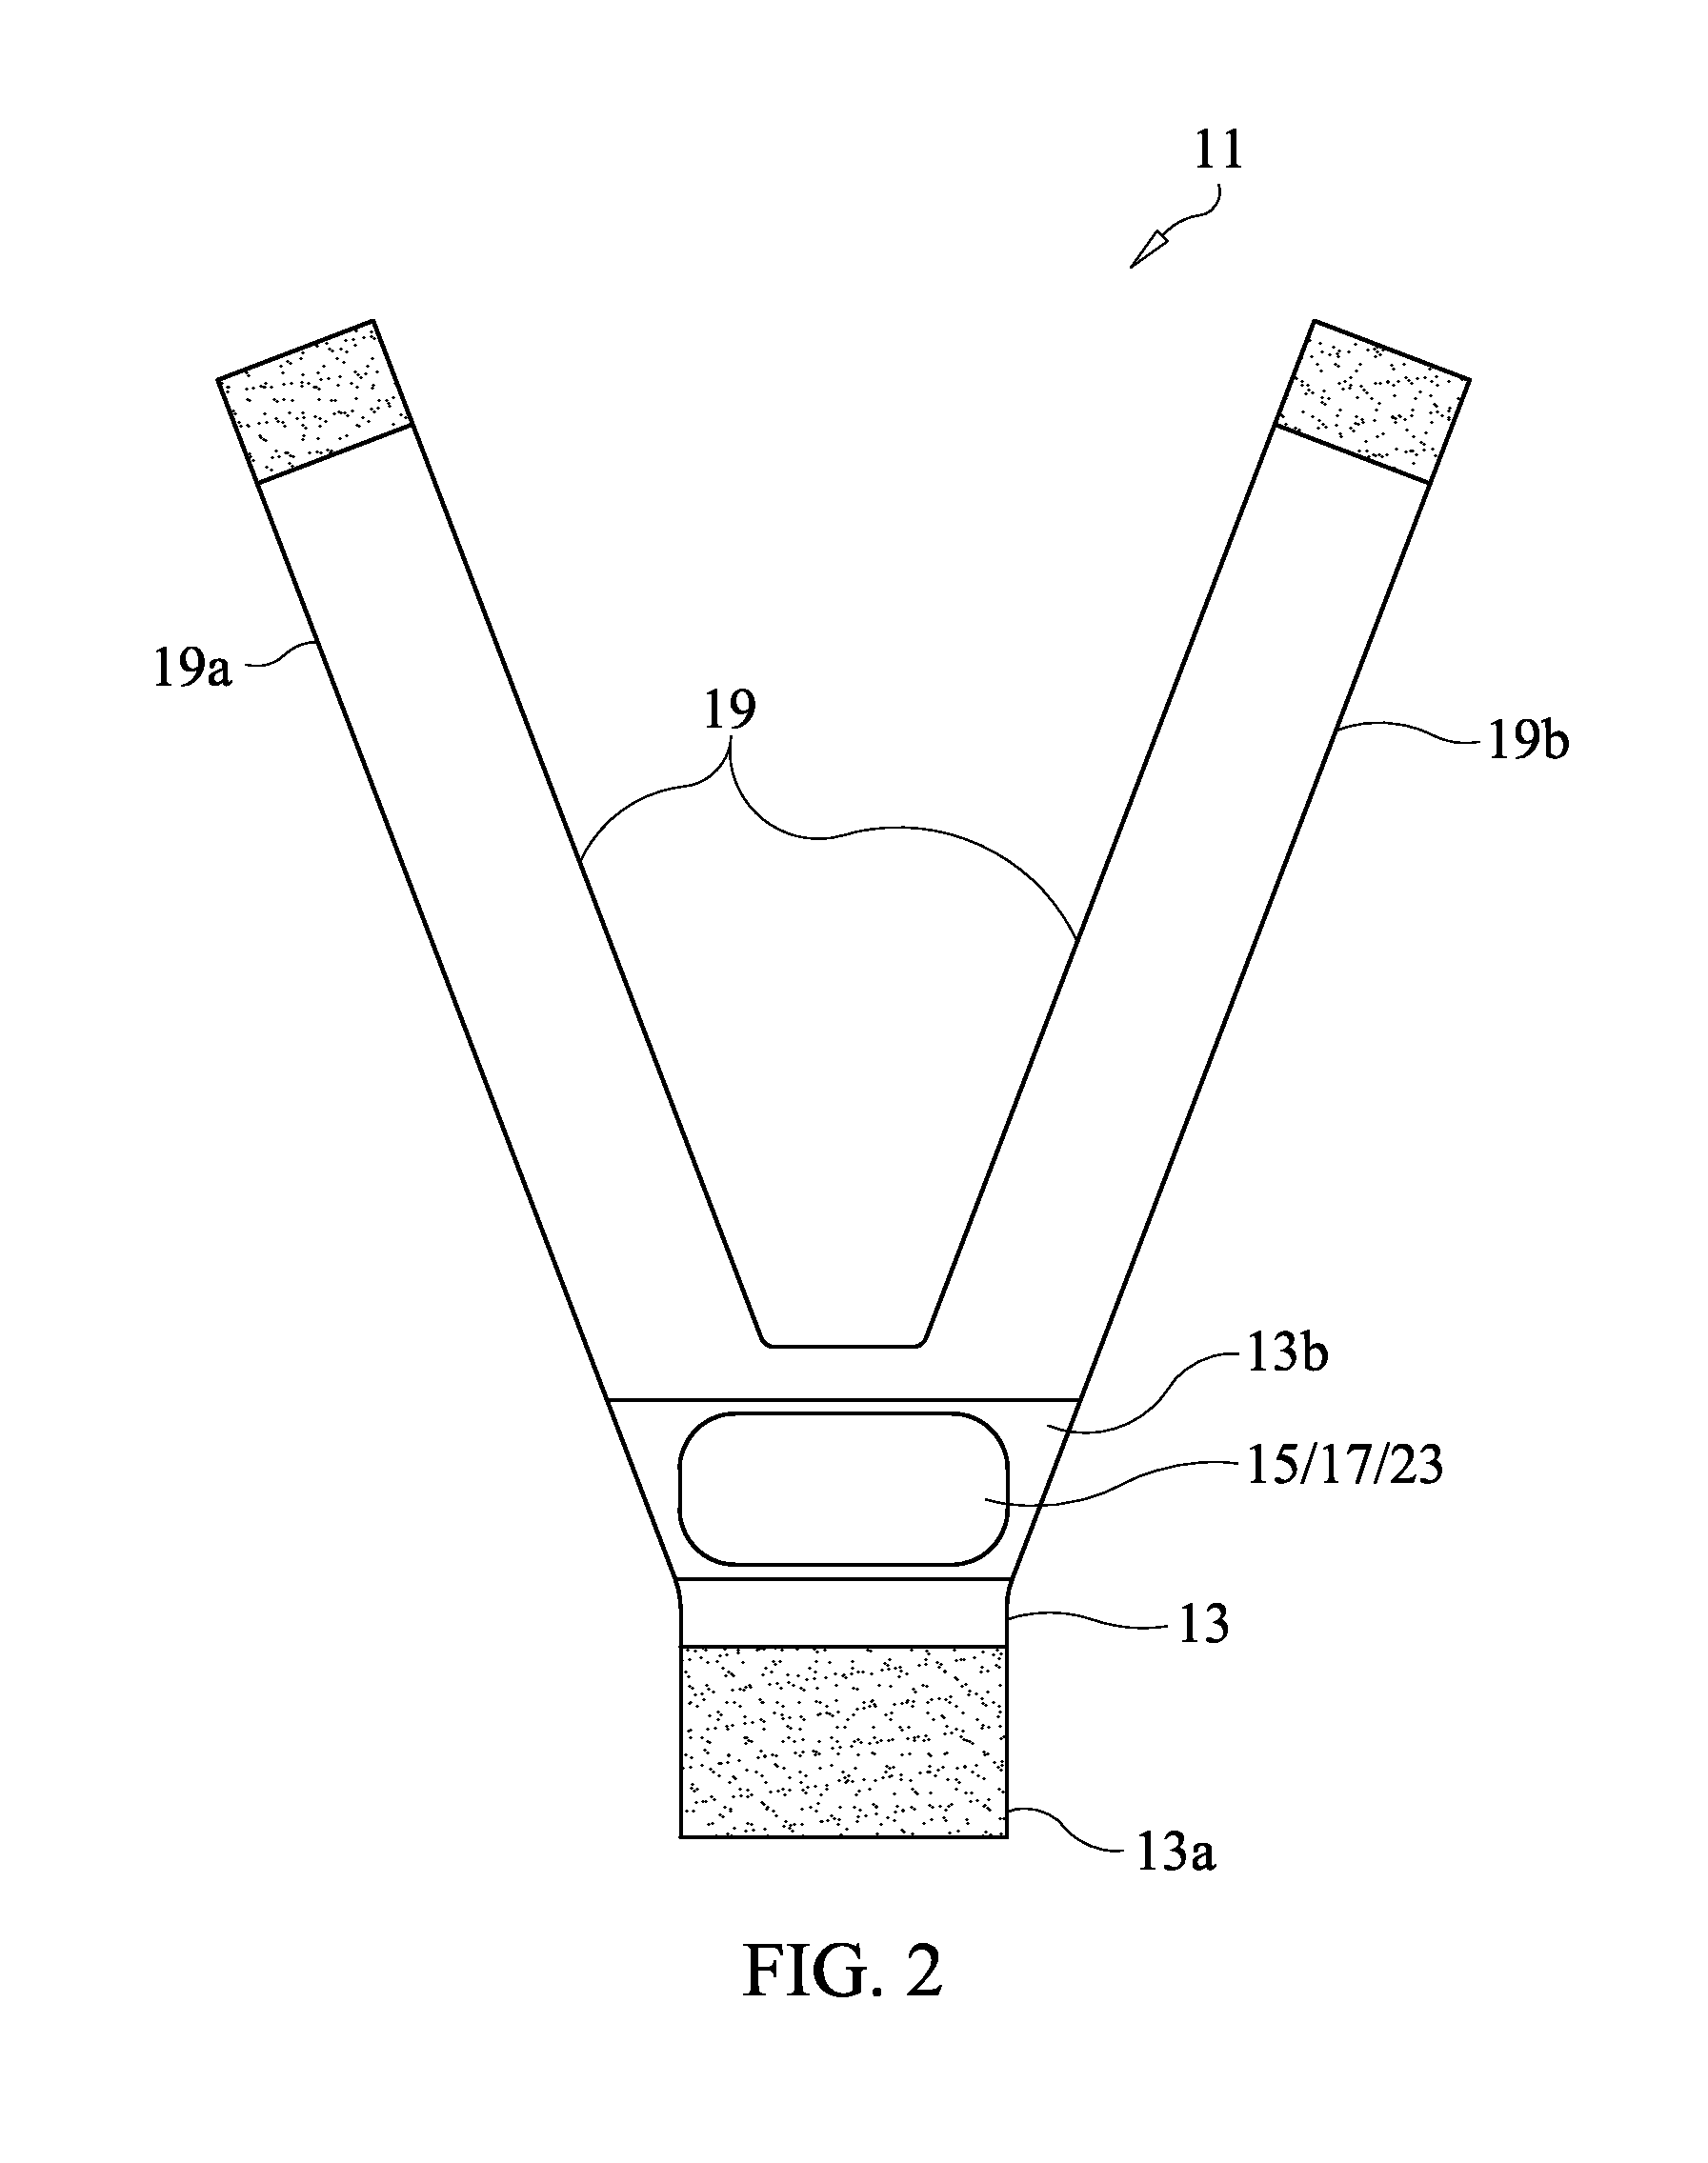 Method of transradial catheterization, device for ulnar artery compression, and method of use